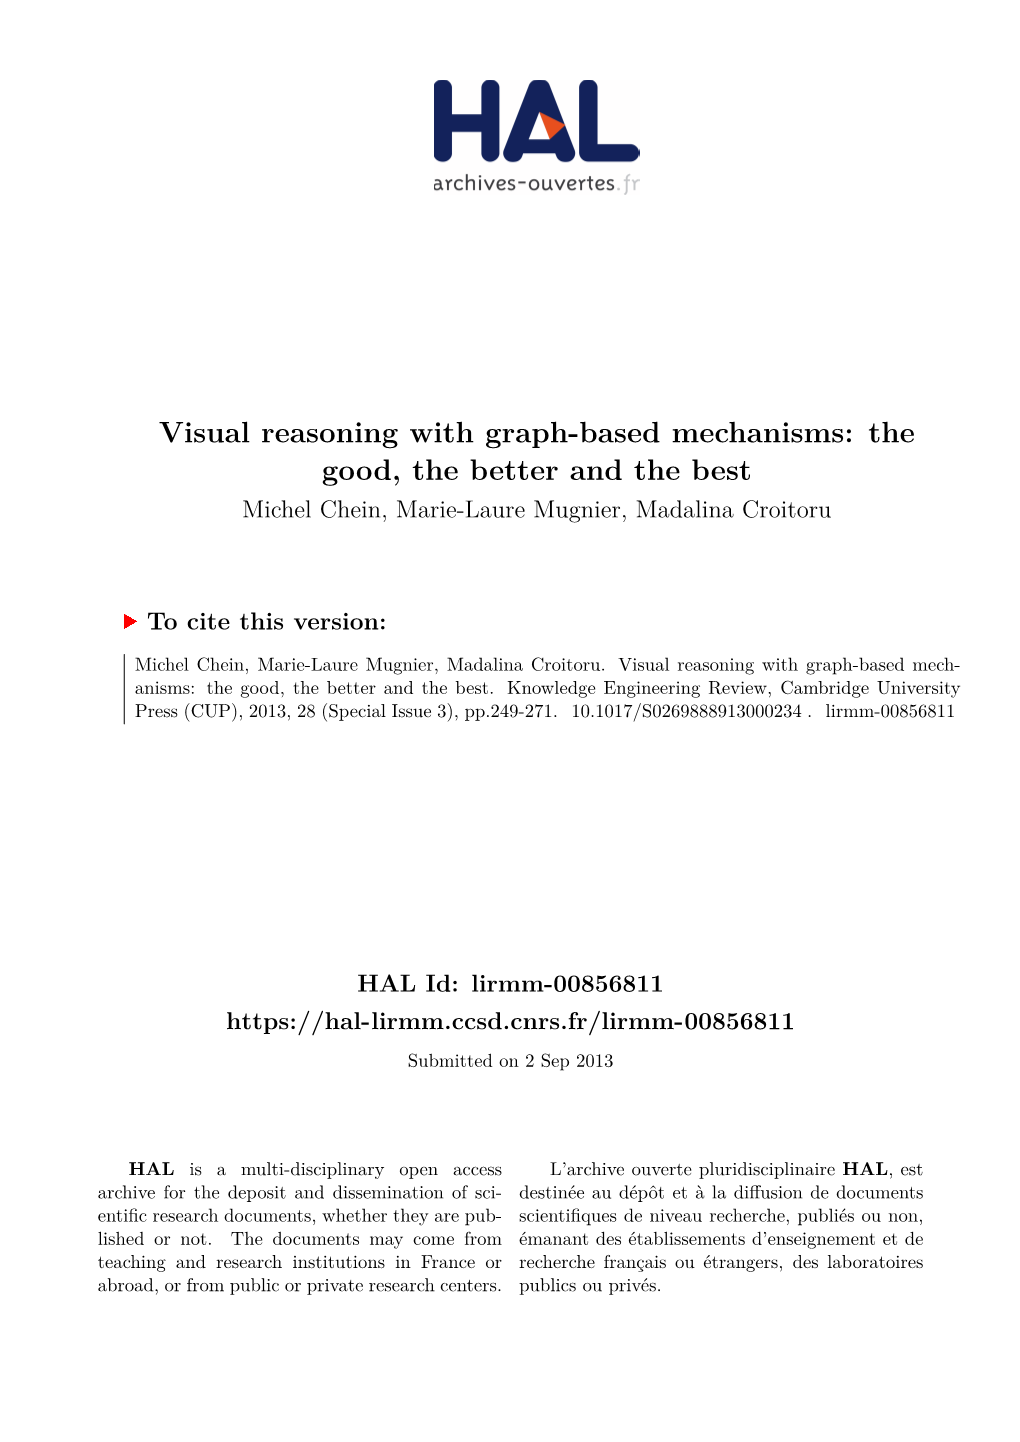 Visual Reasoning with Graph-Based Mechanisms: the Good, the Better and the Best Michel Chein, Marie-Laure Mugnier, Madalina Croitoru